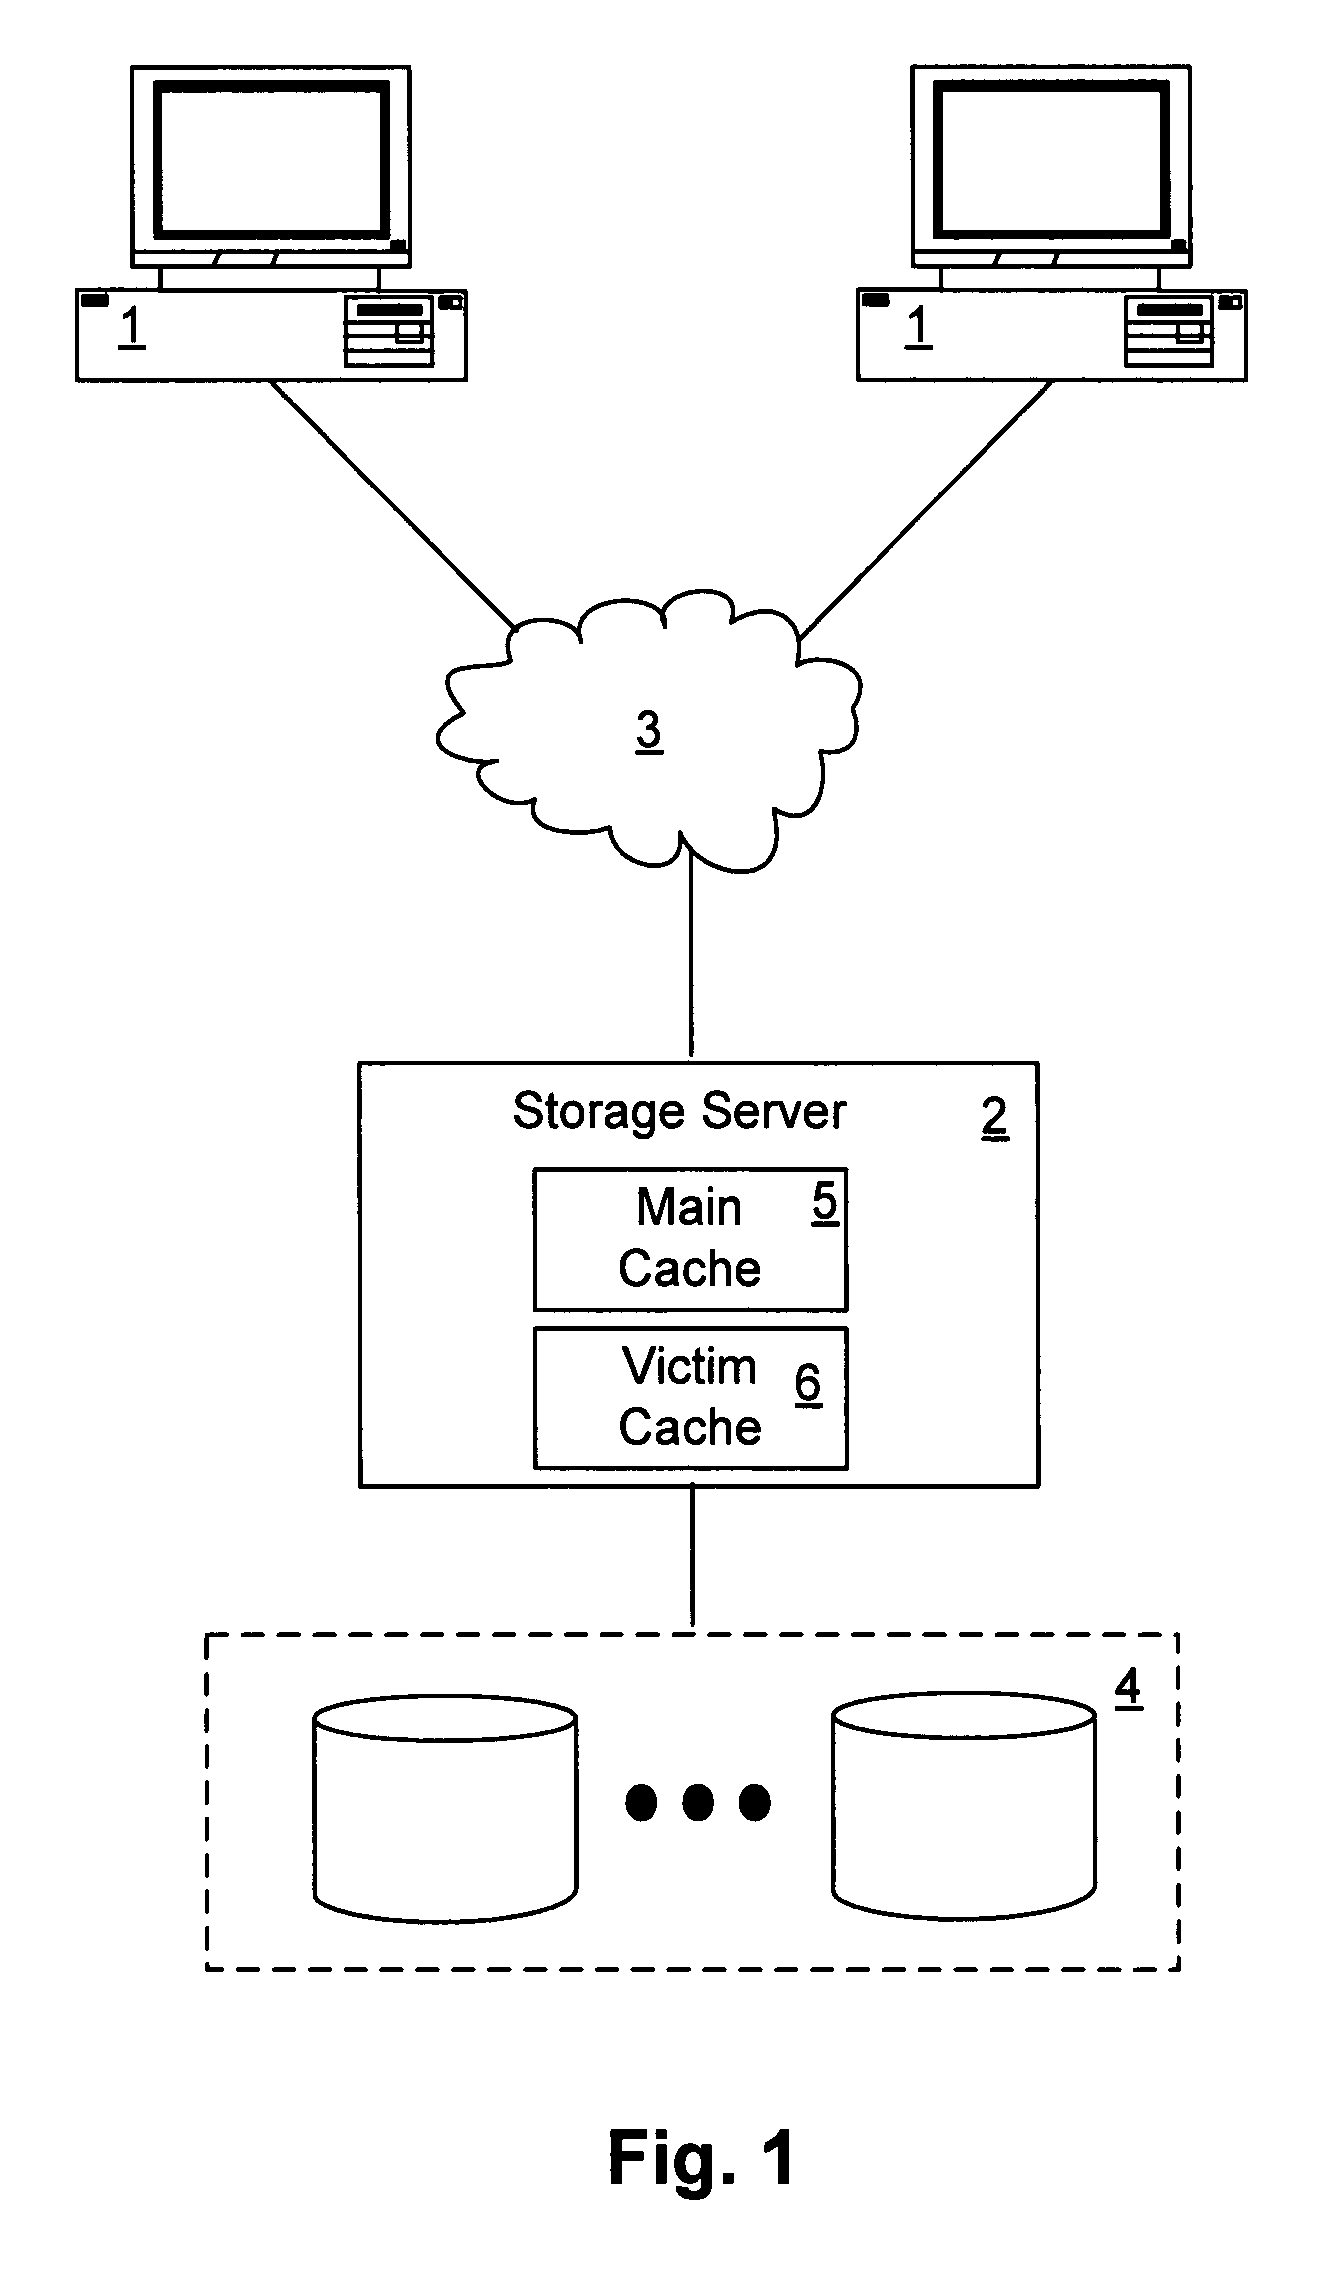 Intelligent caching of data in a storage server victim cache